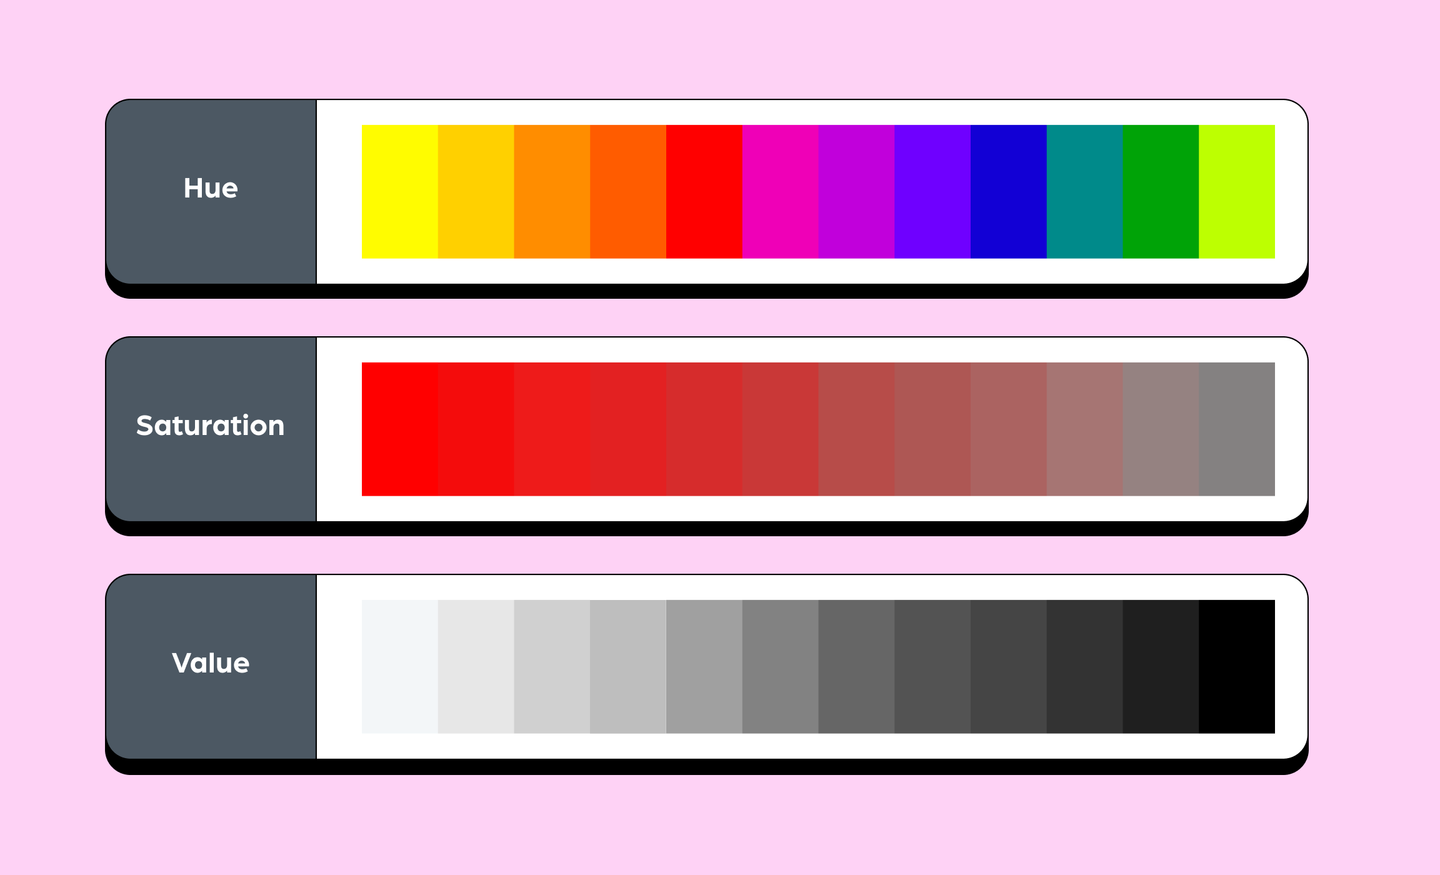 A visual explanation of hue, saturation and value